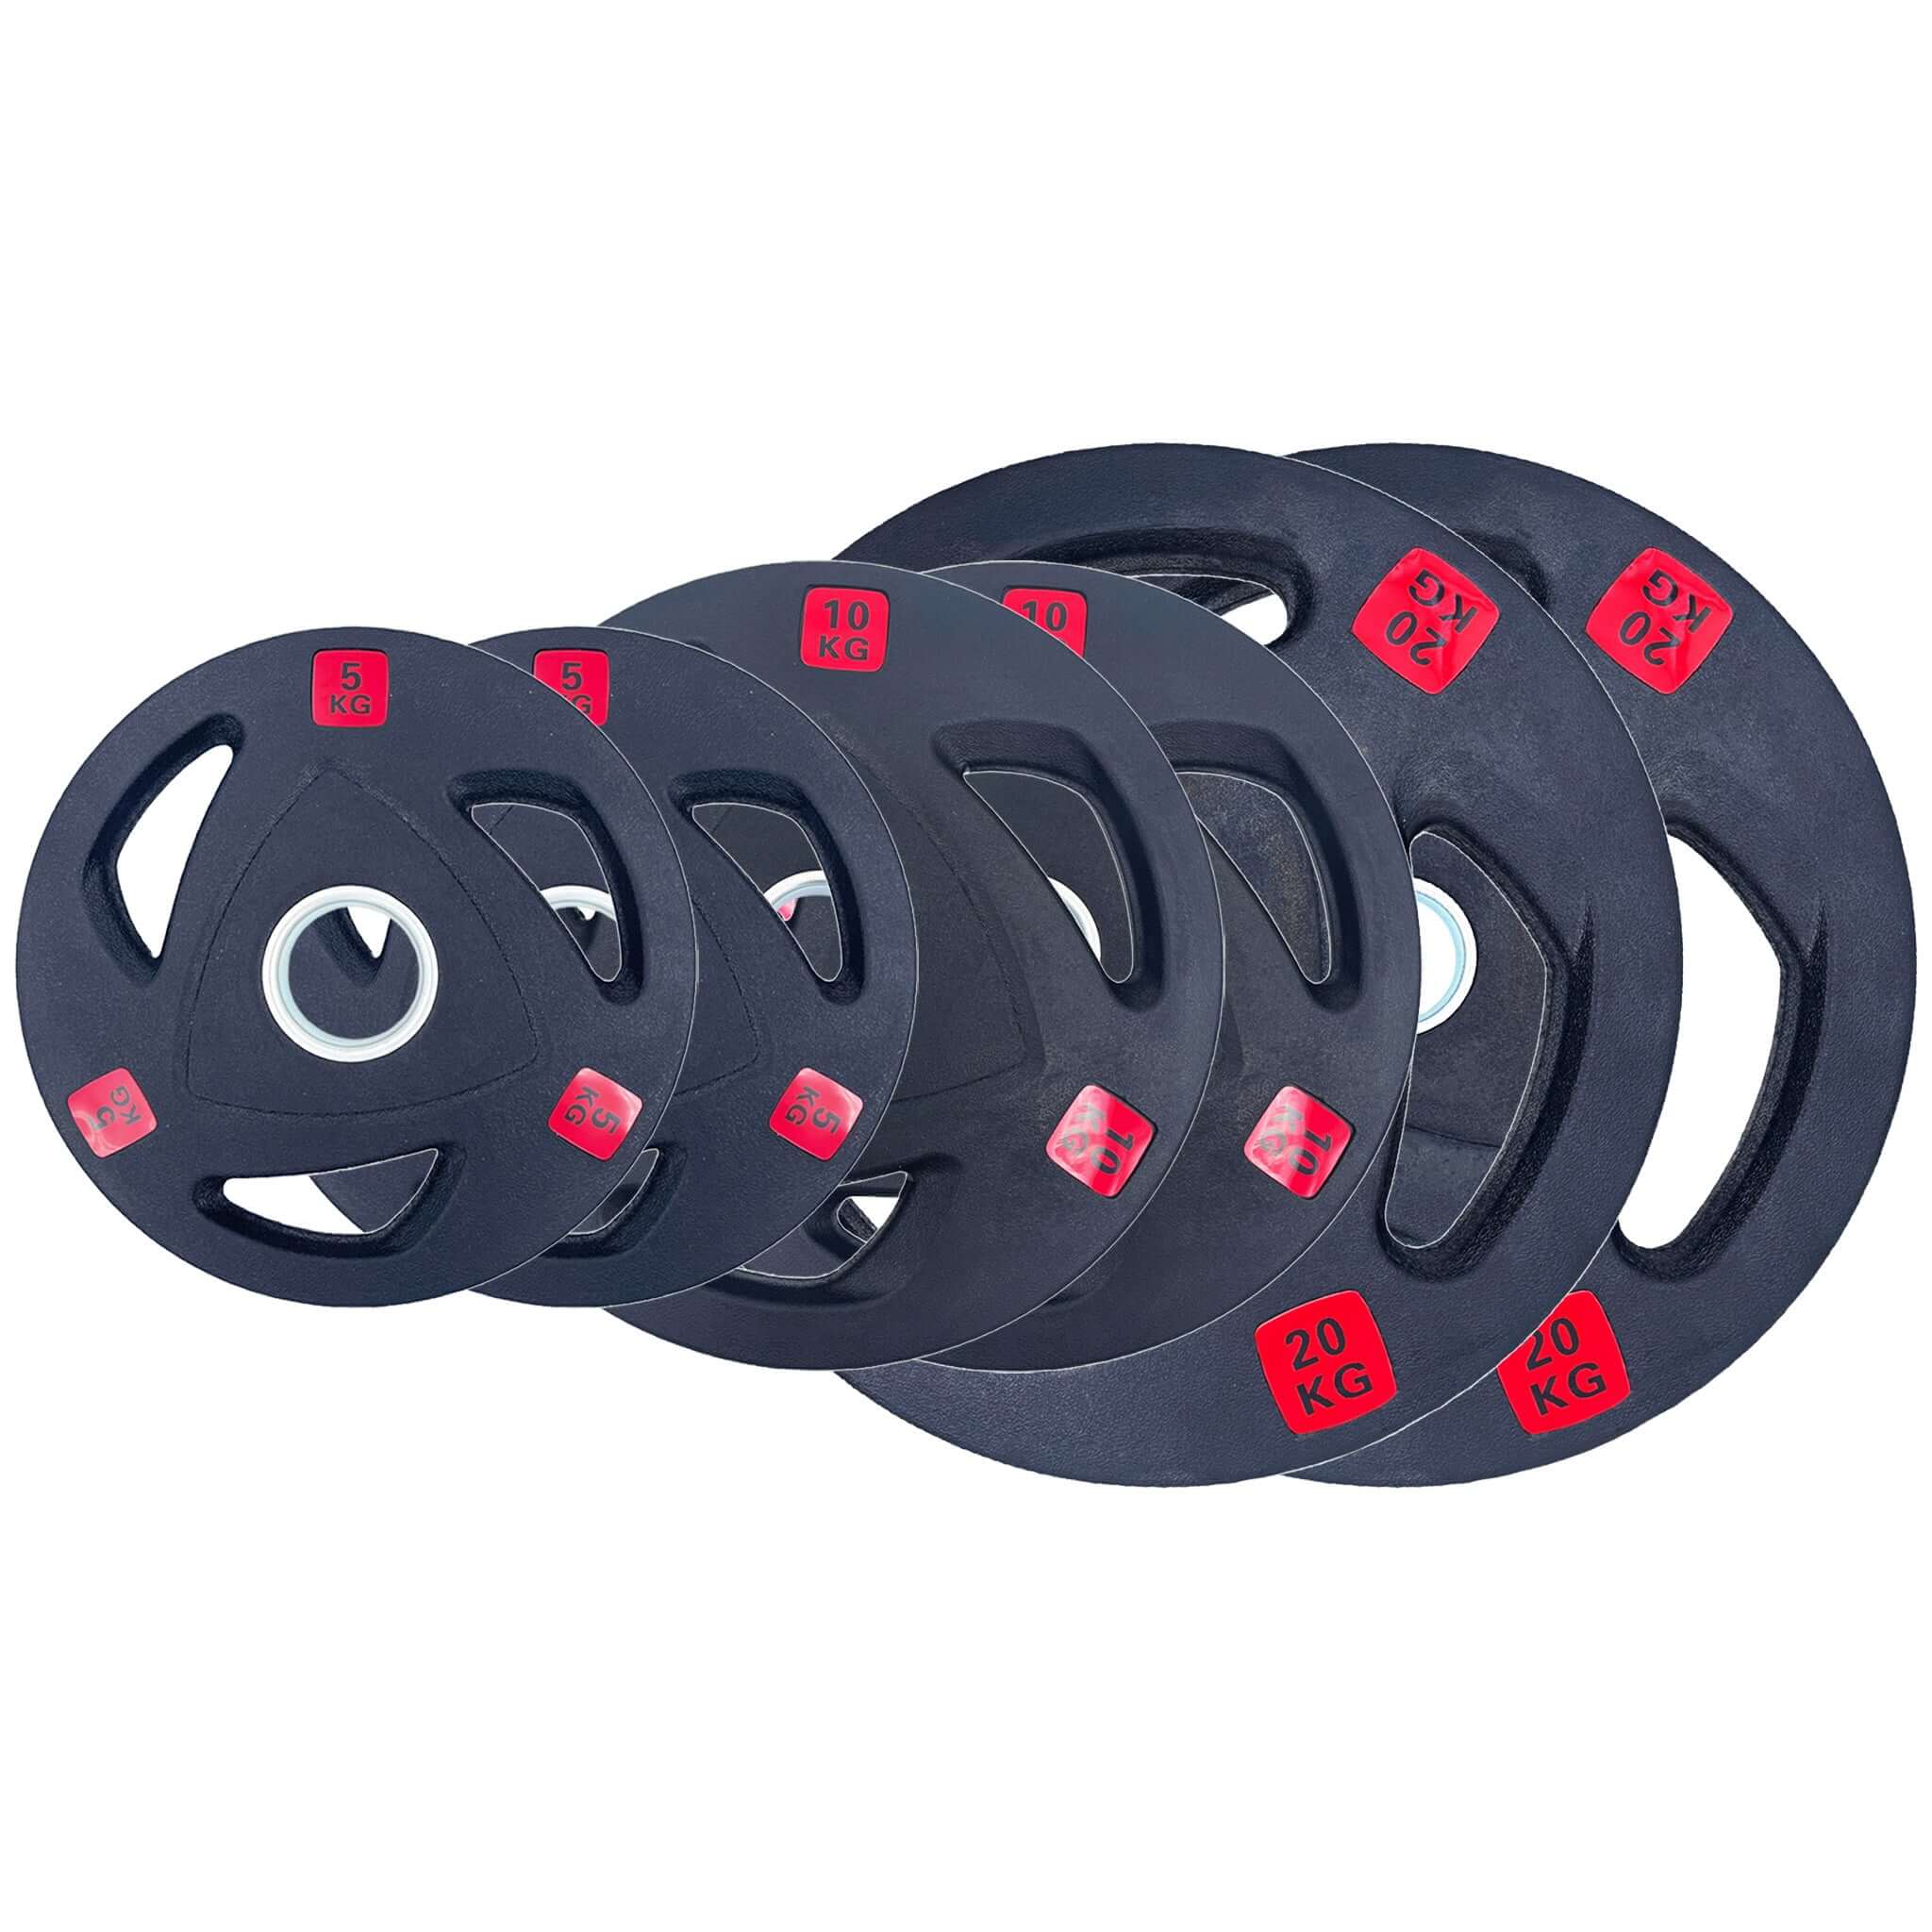 70kg-157.5kg Bundles Rubber Coated Type-A Tri-Grip Weight Plates | Tri Grip Rubber Plates | INSOURCE